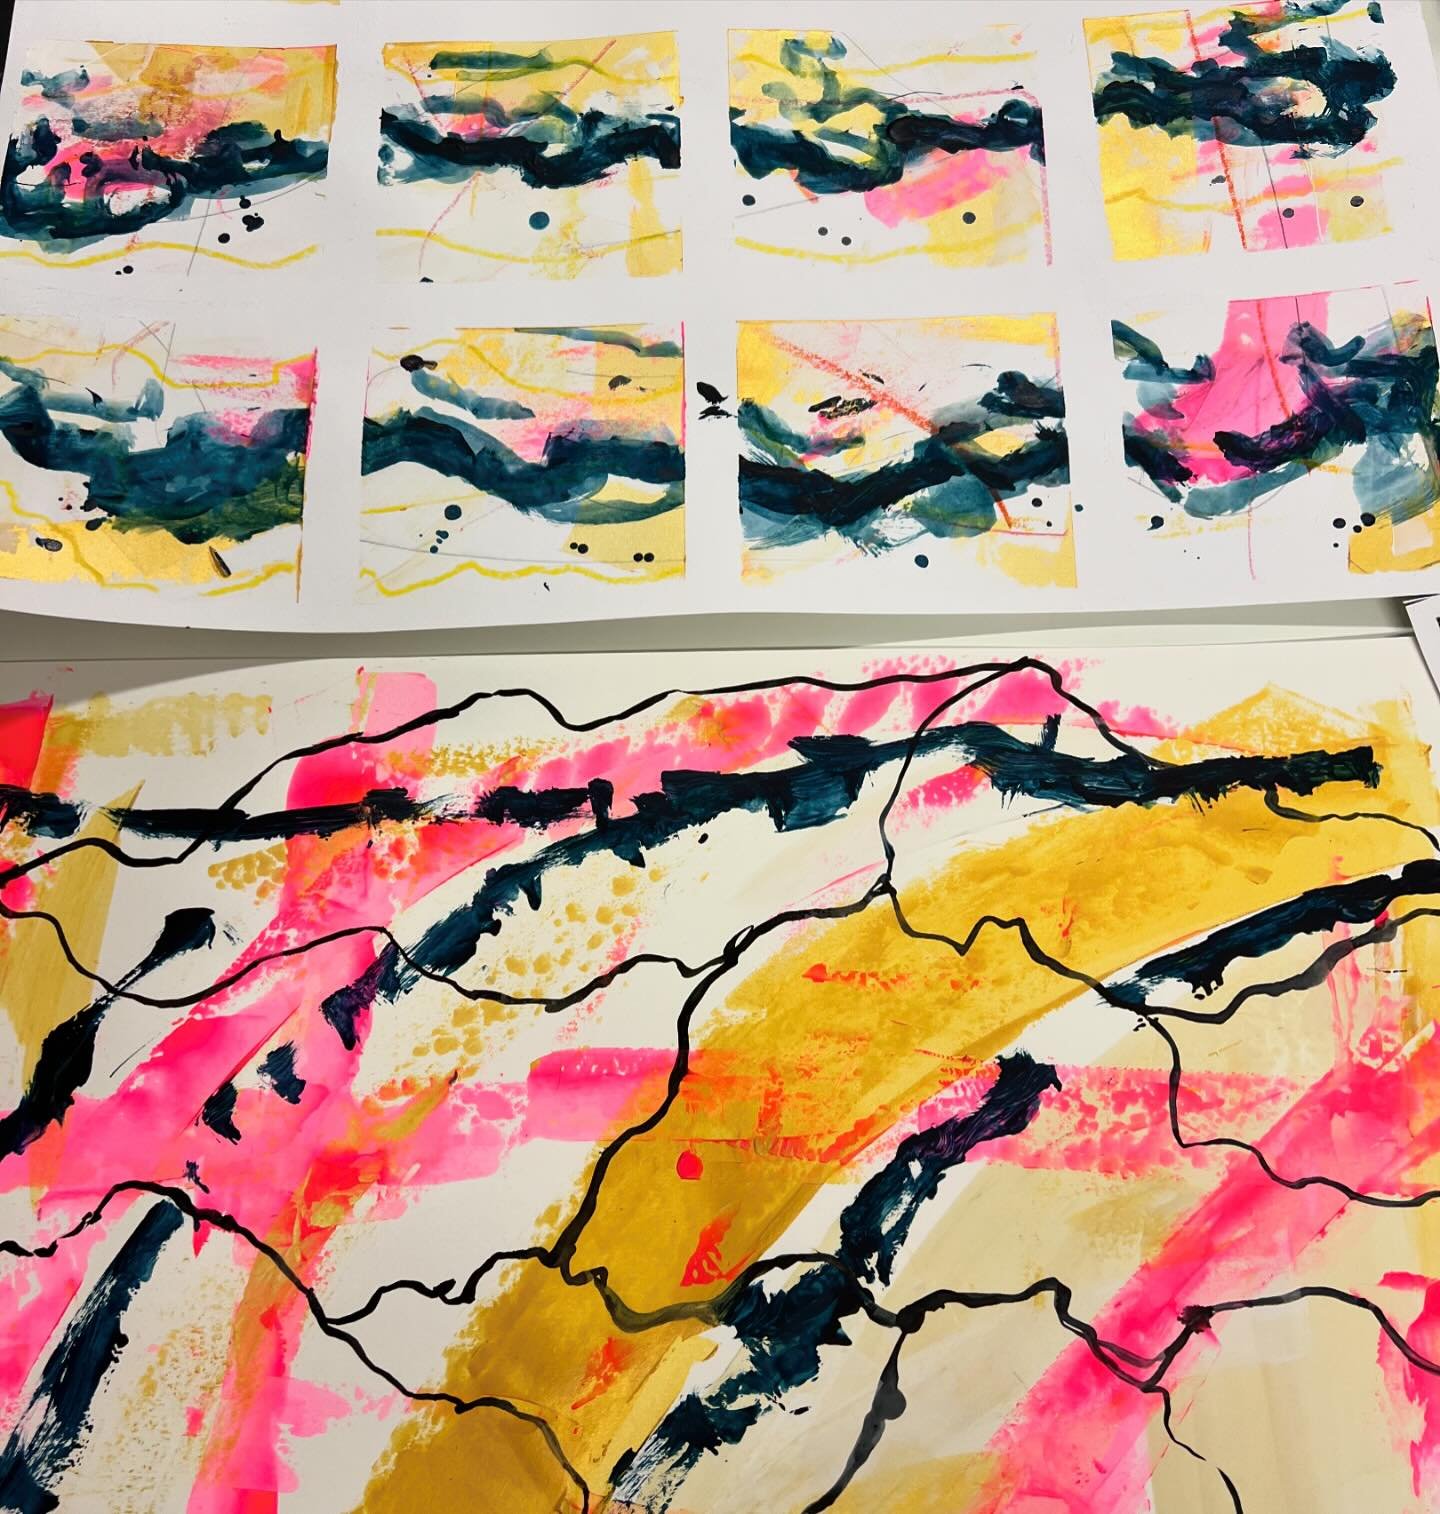 Off to a strong start on the first day of the summer term of @expressiveacrylics. My courses and workshops are very process driven so that you very quickly find your own colour palette and style. Love how different everyone is right from the start!

